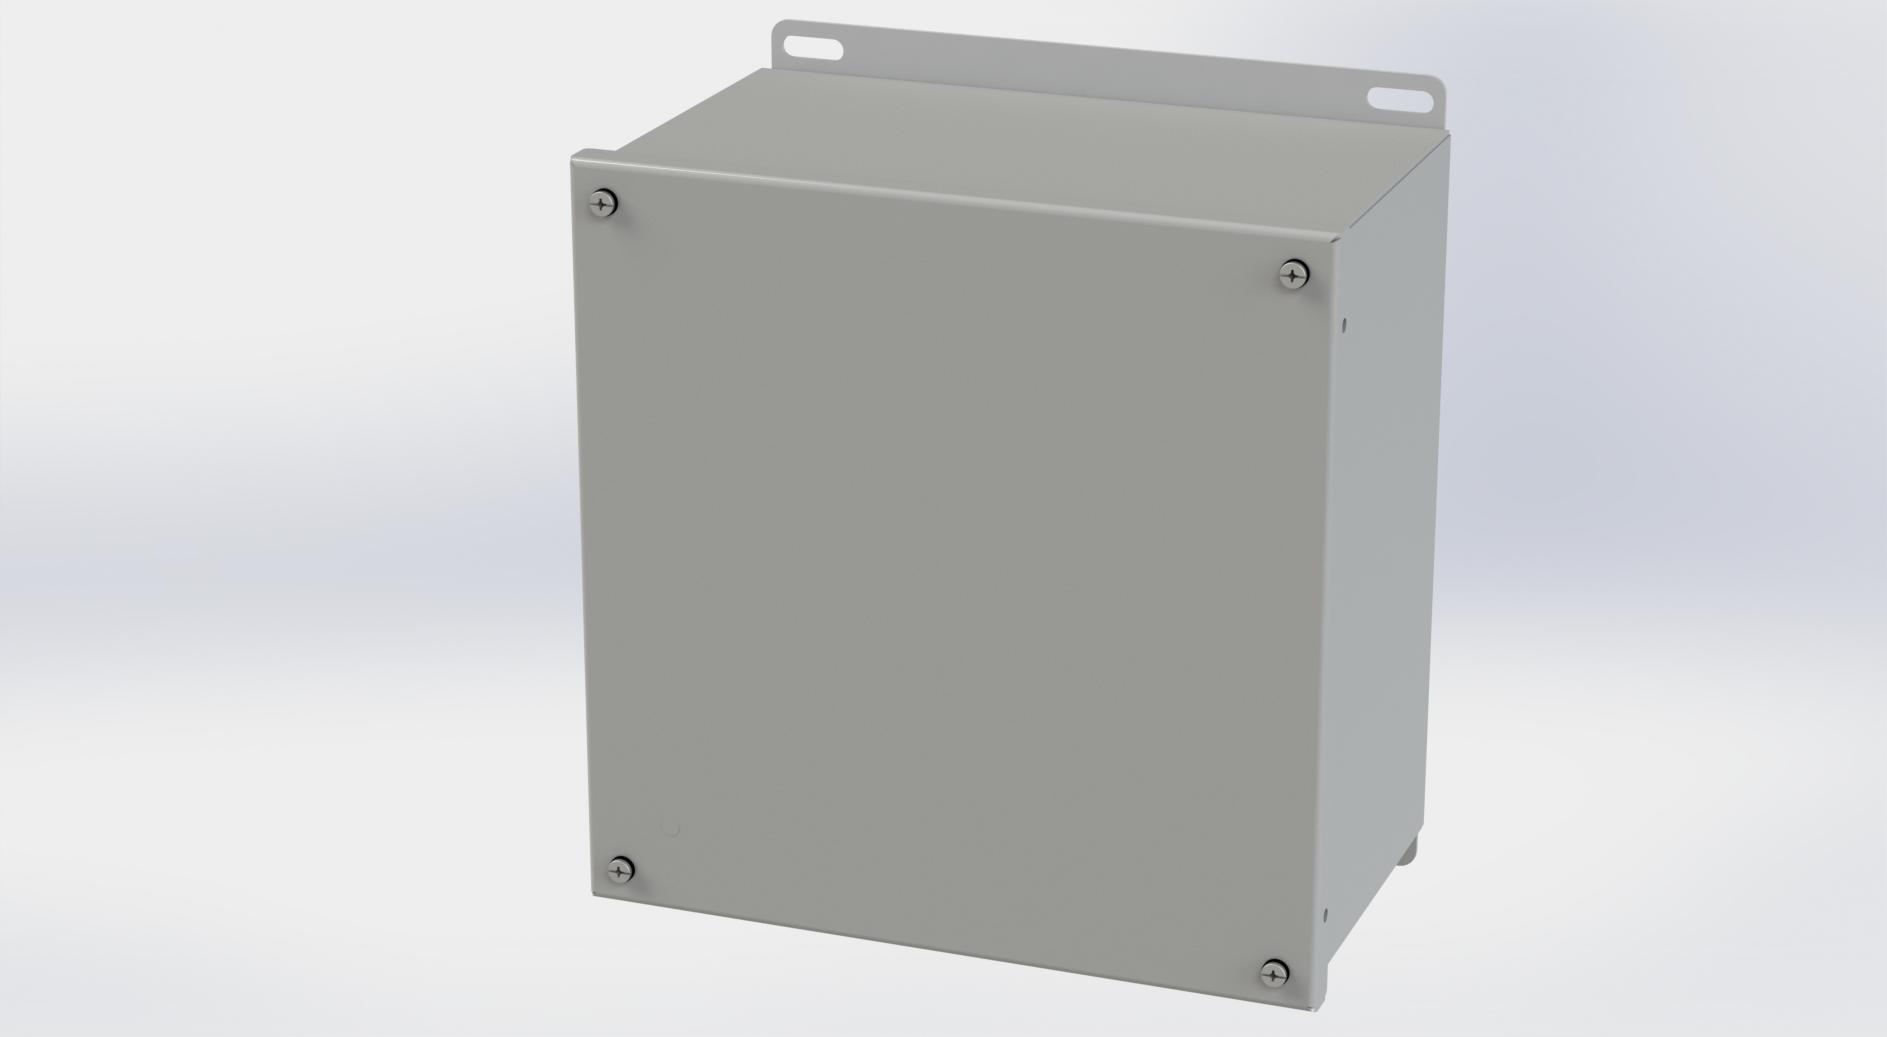 Saginaw Control SCE-10106SC SC Enclosure, Height:10.13", Width:10.00", Depth:6.00", ANSI-61 gray powder coating inside and out.  Optional sub-panels are powder coated white.